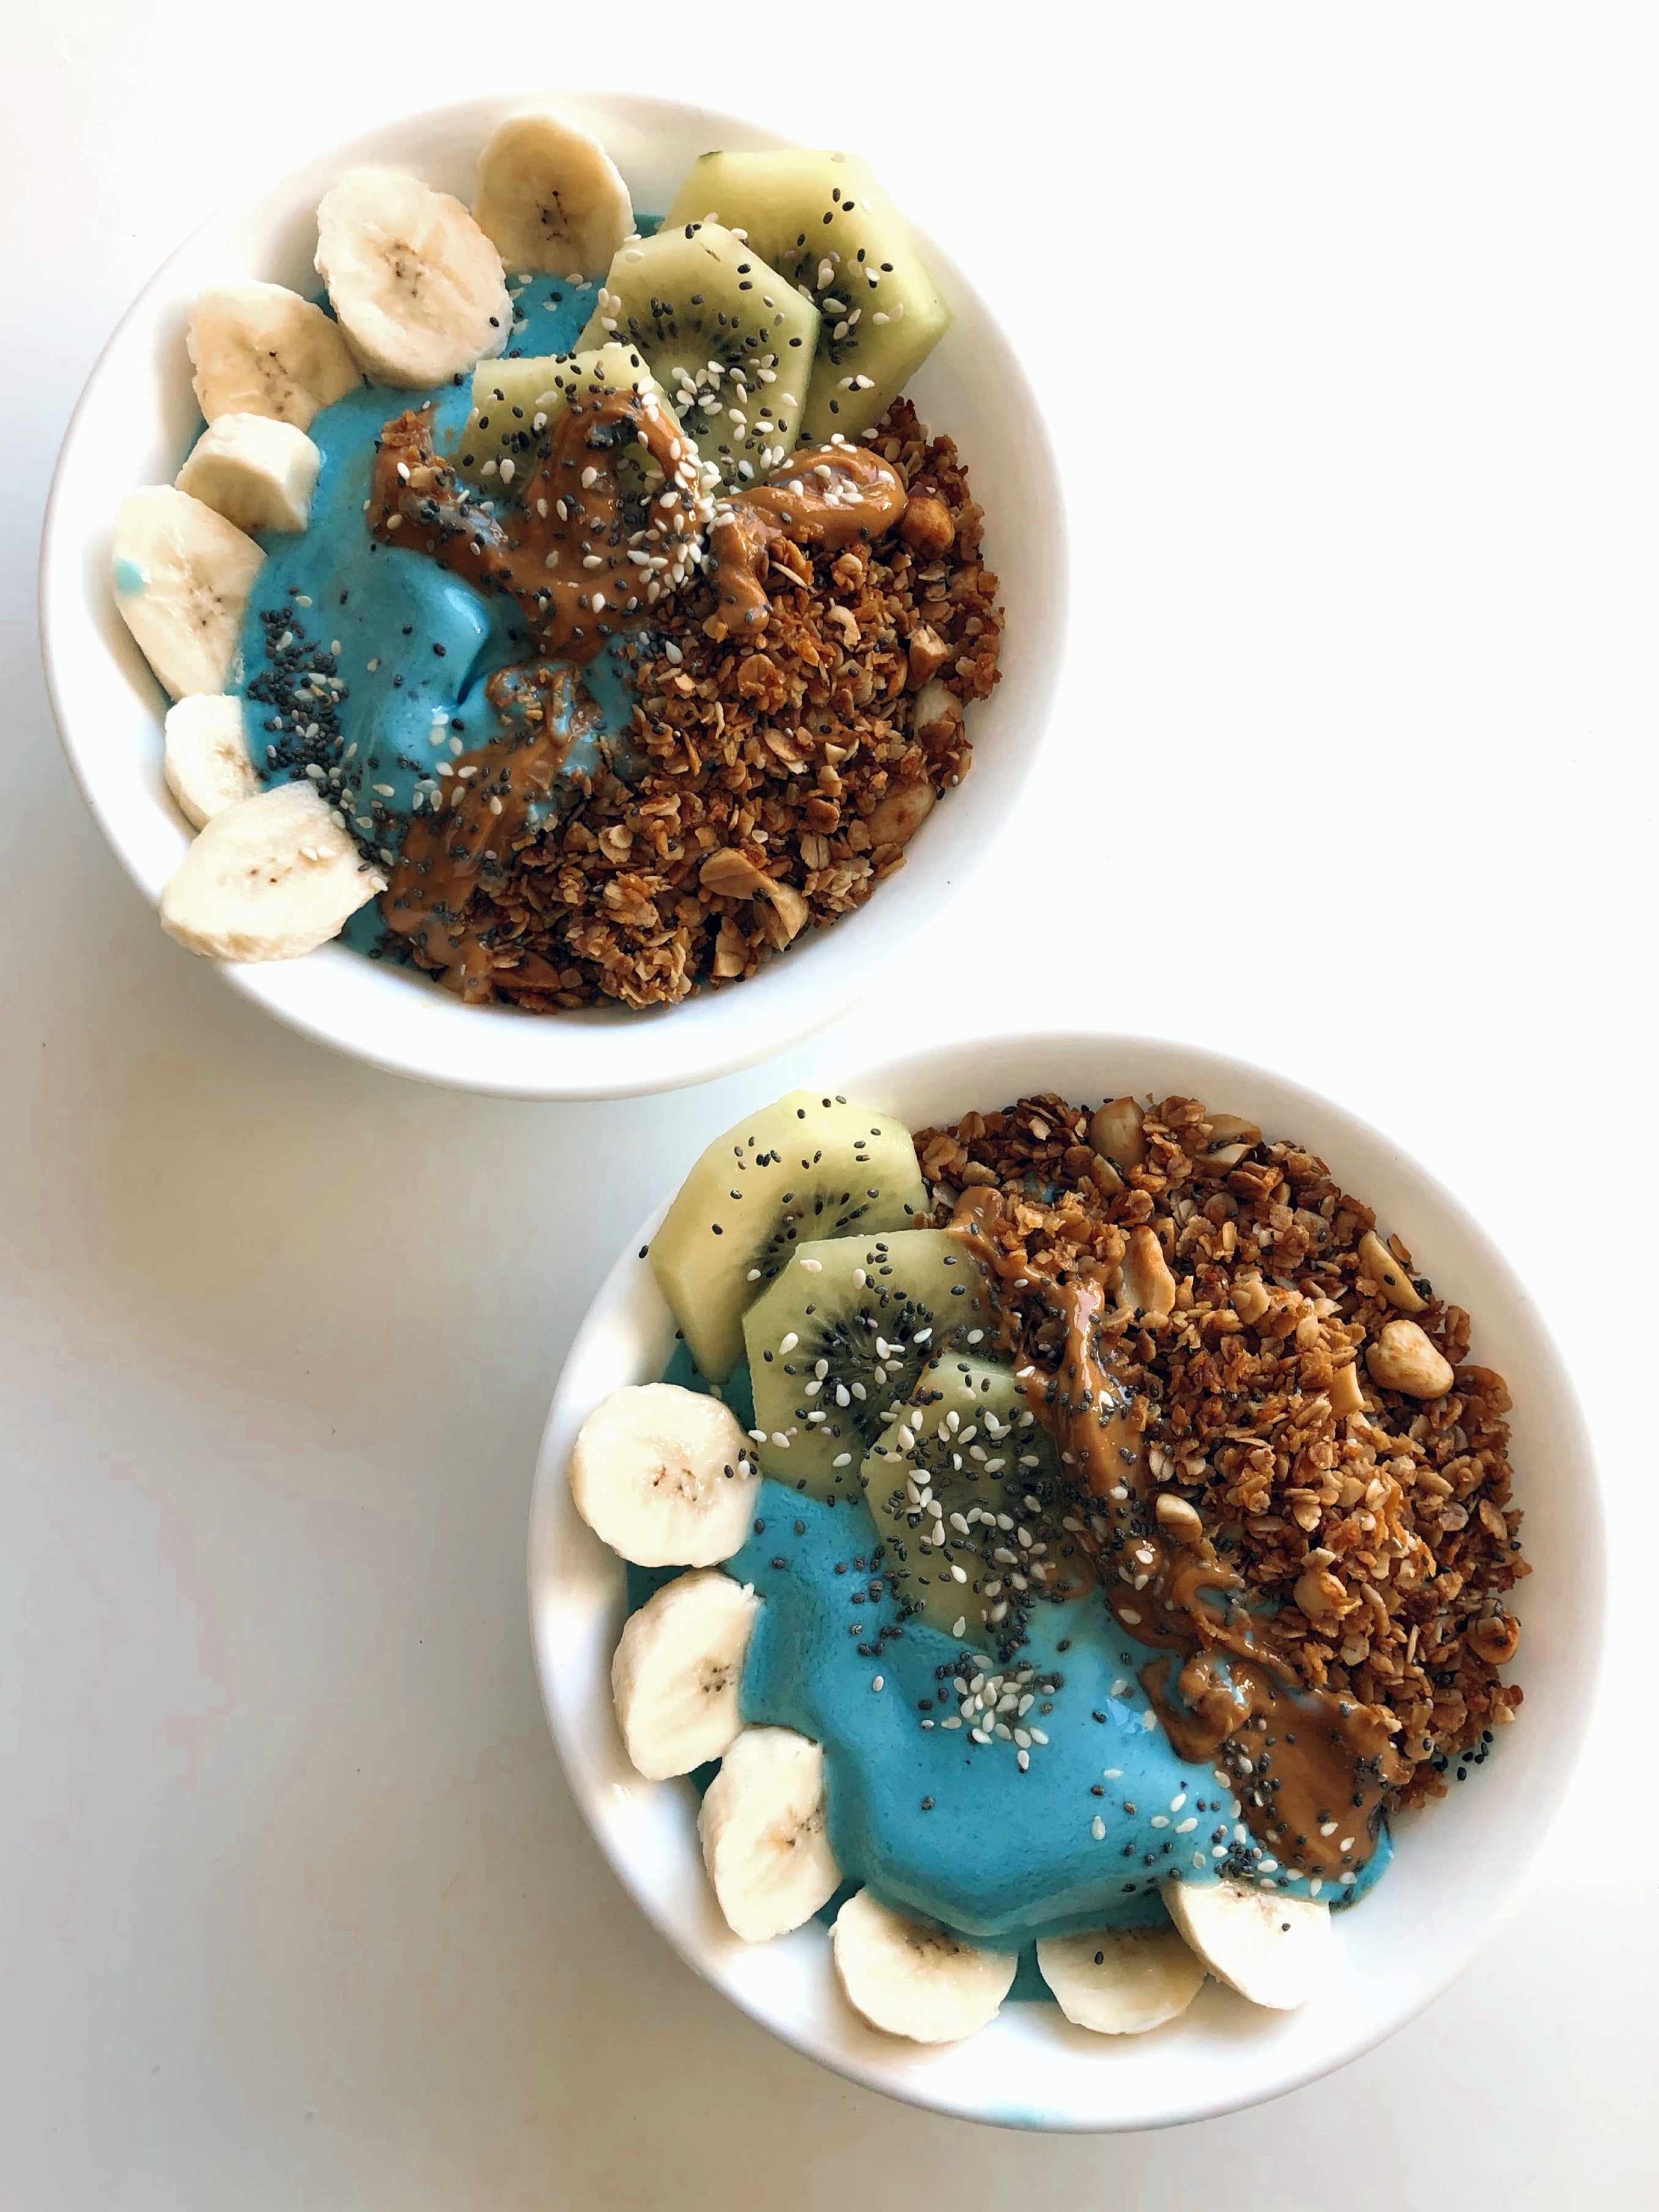 smoothies, smoothie delivery, food box delivery, ready-to-blend smoothies, blue spirulina home delivery, blue magic smoothie, sandbank smoothies, smoothie bowl, smoothie bowl home delivery, healthy home delivery, healthy food box